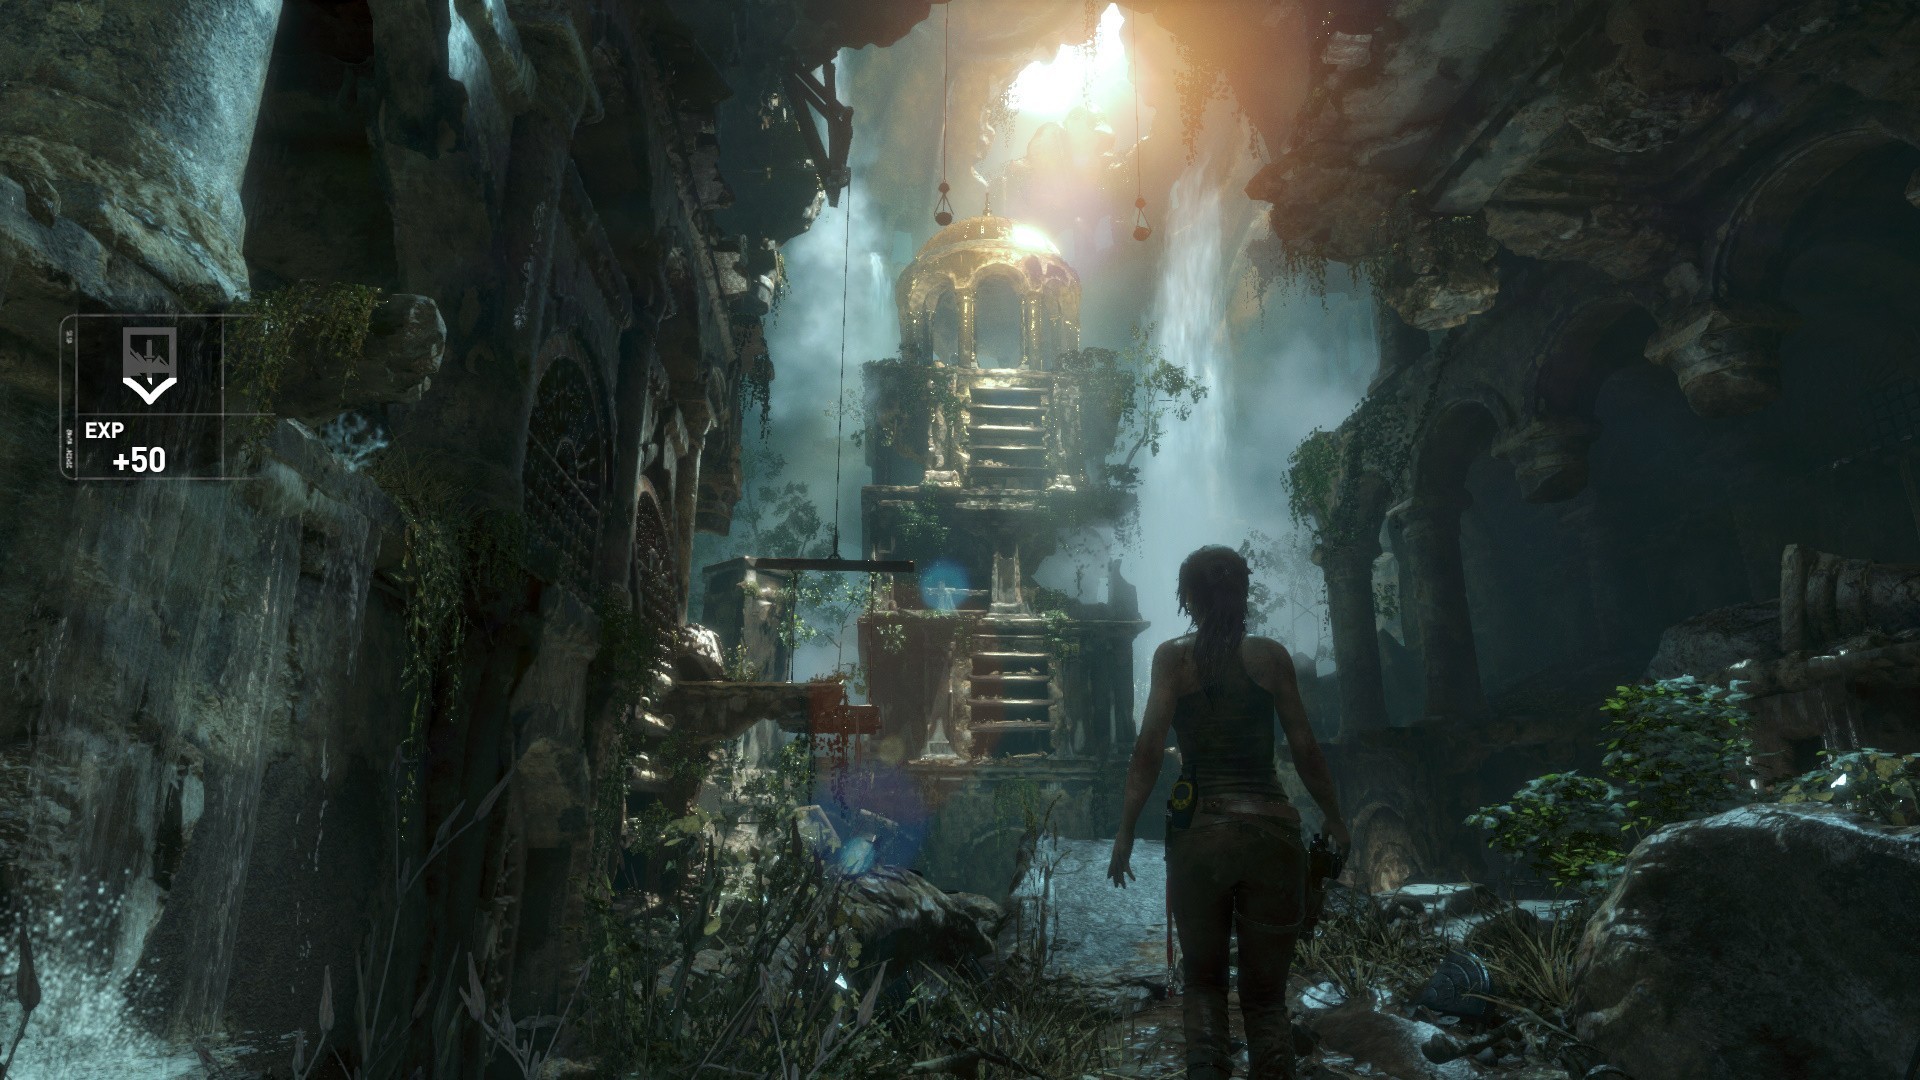 tomb raider rise of the tomb raider pc release date